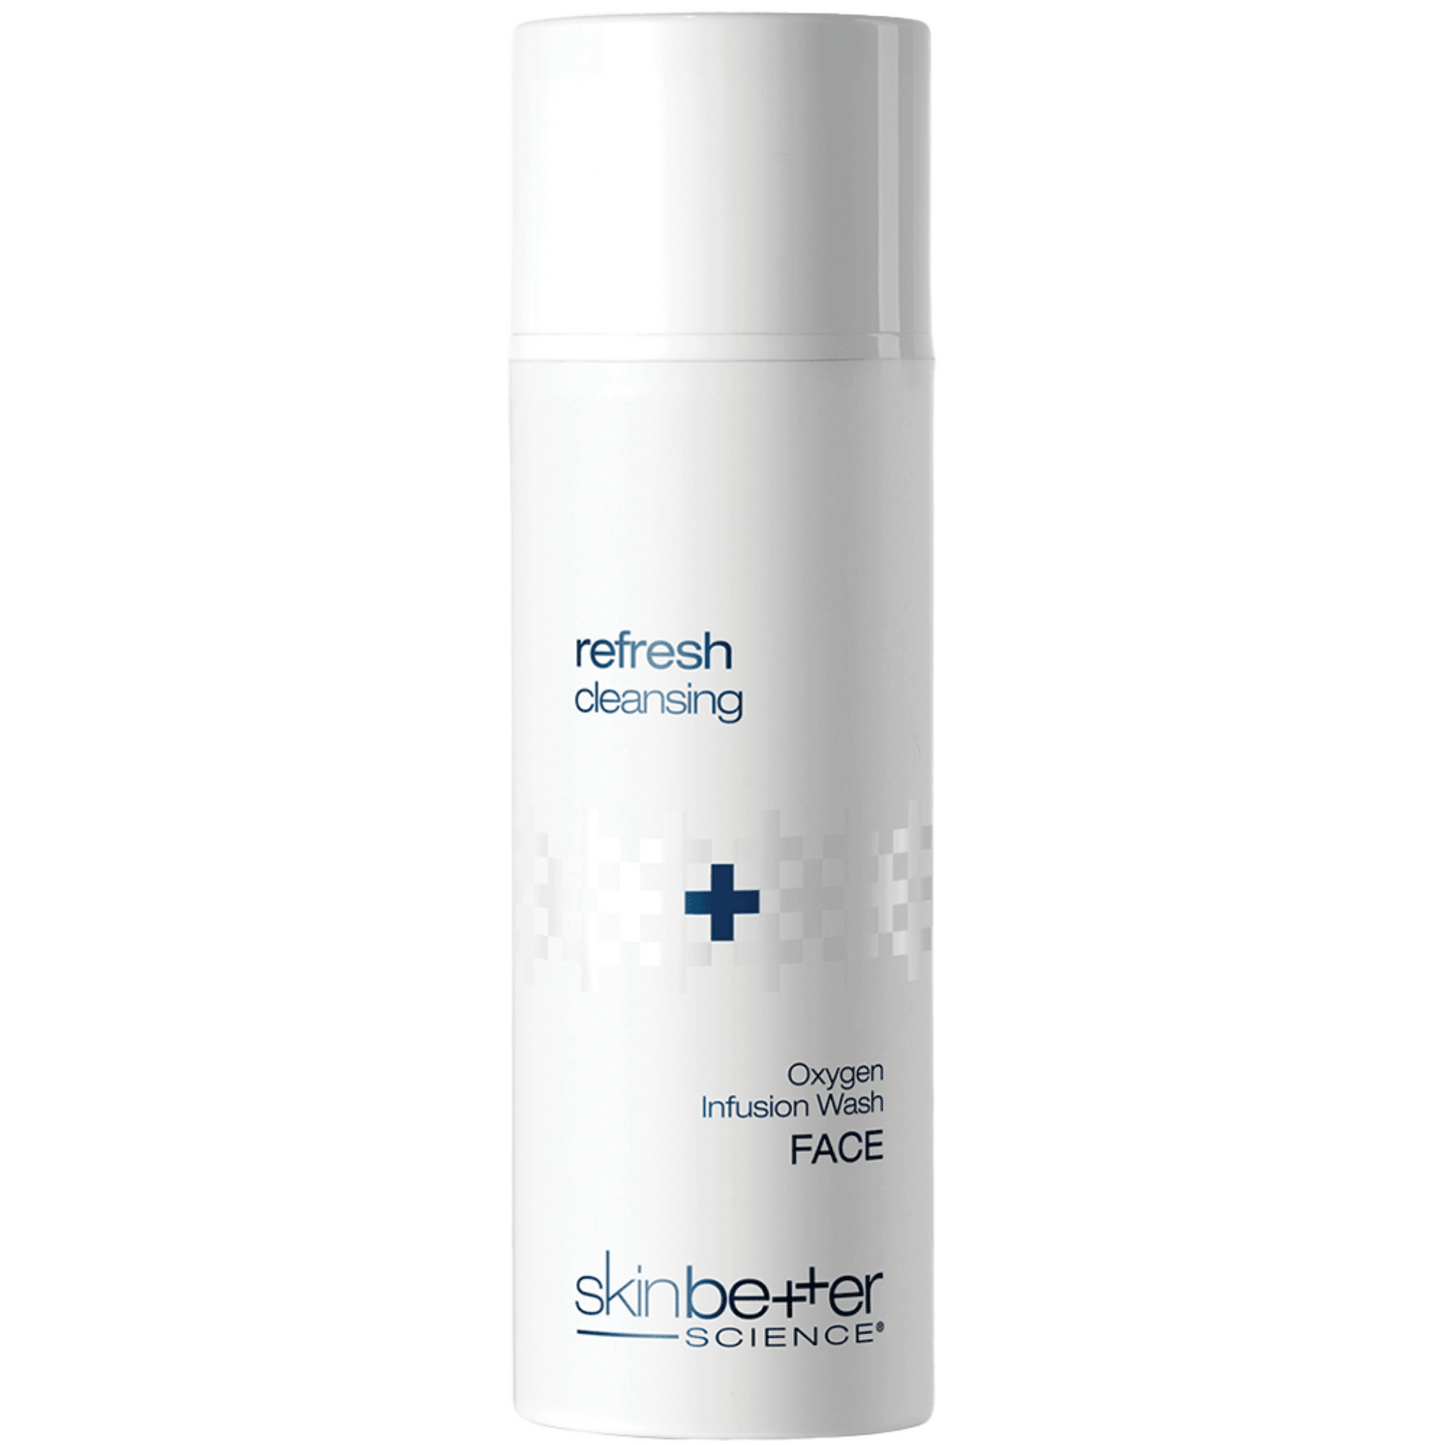 skinbetter science® Oxygen Infusion Wash